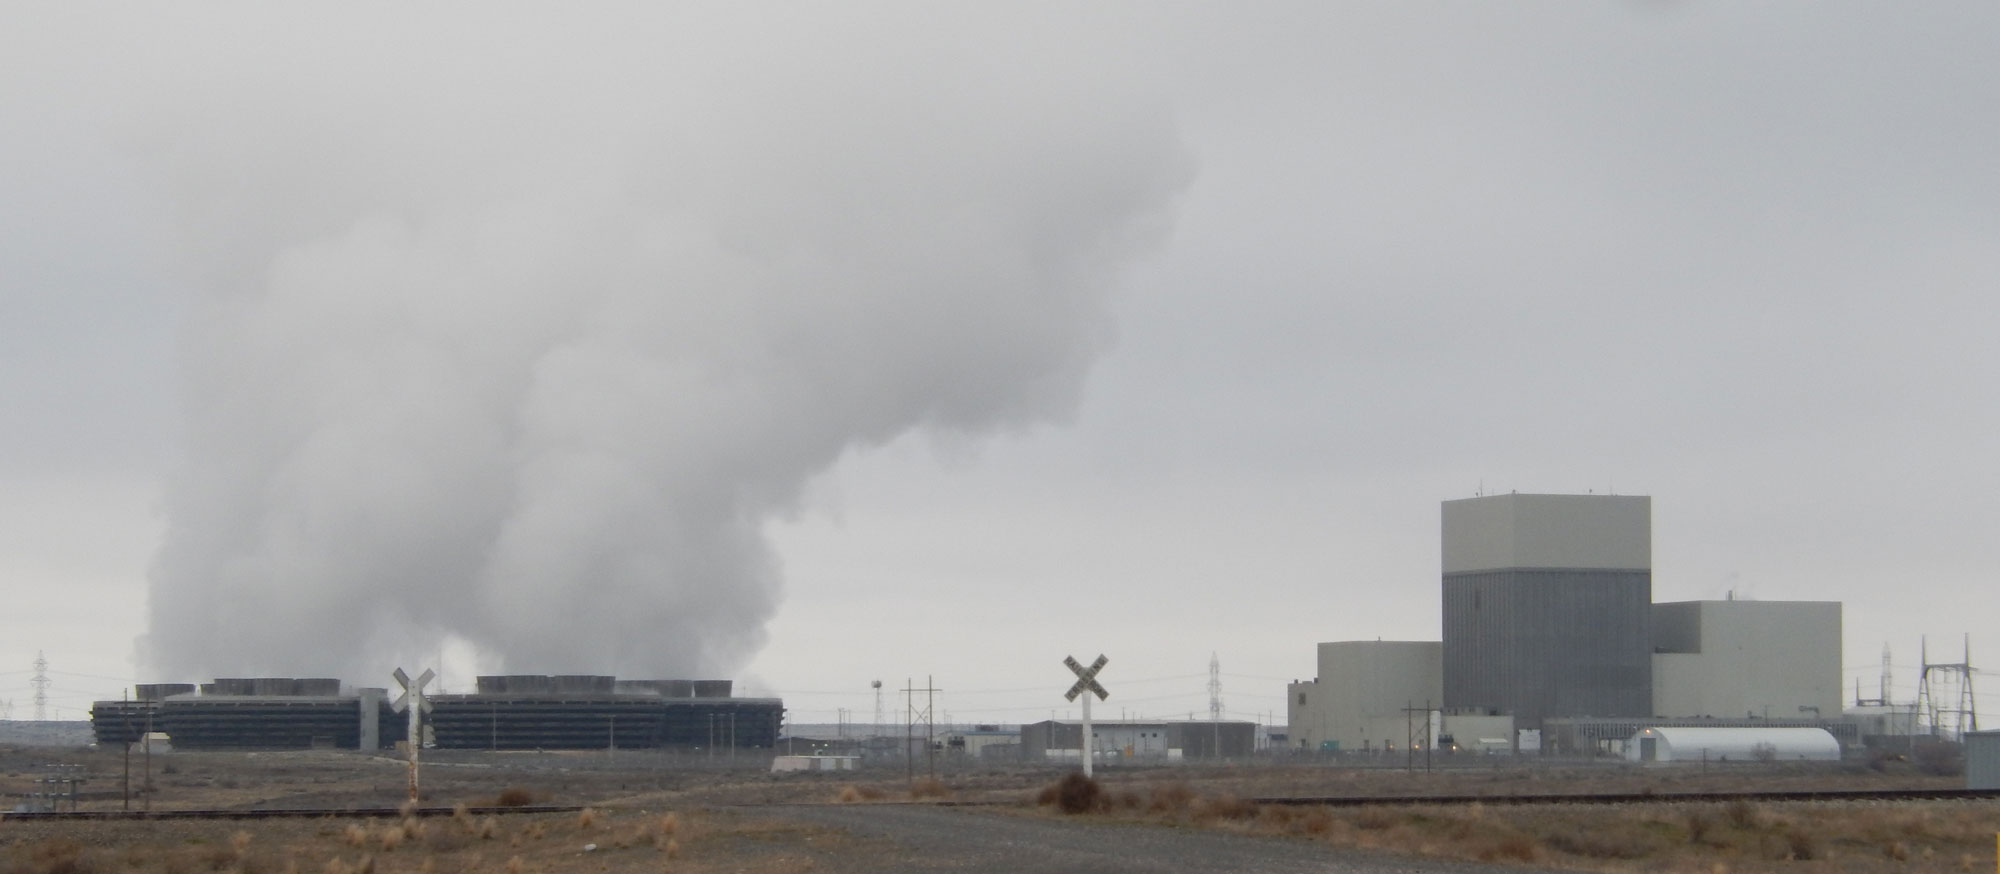 Photograph of Columbia Generating Station, a nuclear power plant is Washington. The photograph shows clouds of steam rising on the left, behind structures of the plant.